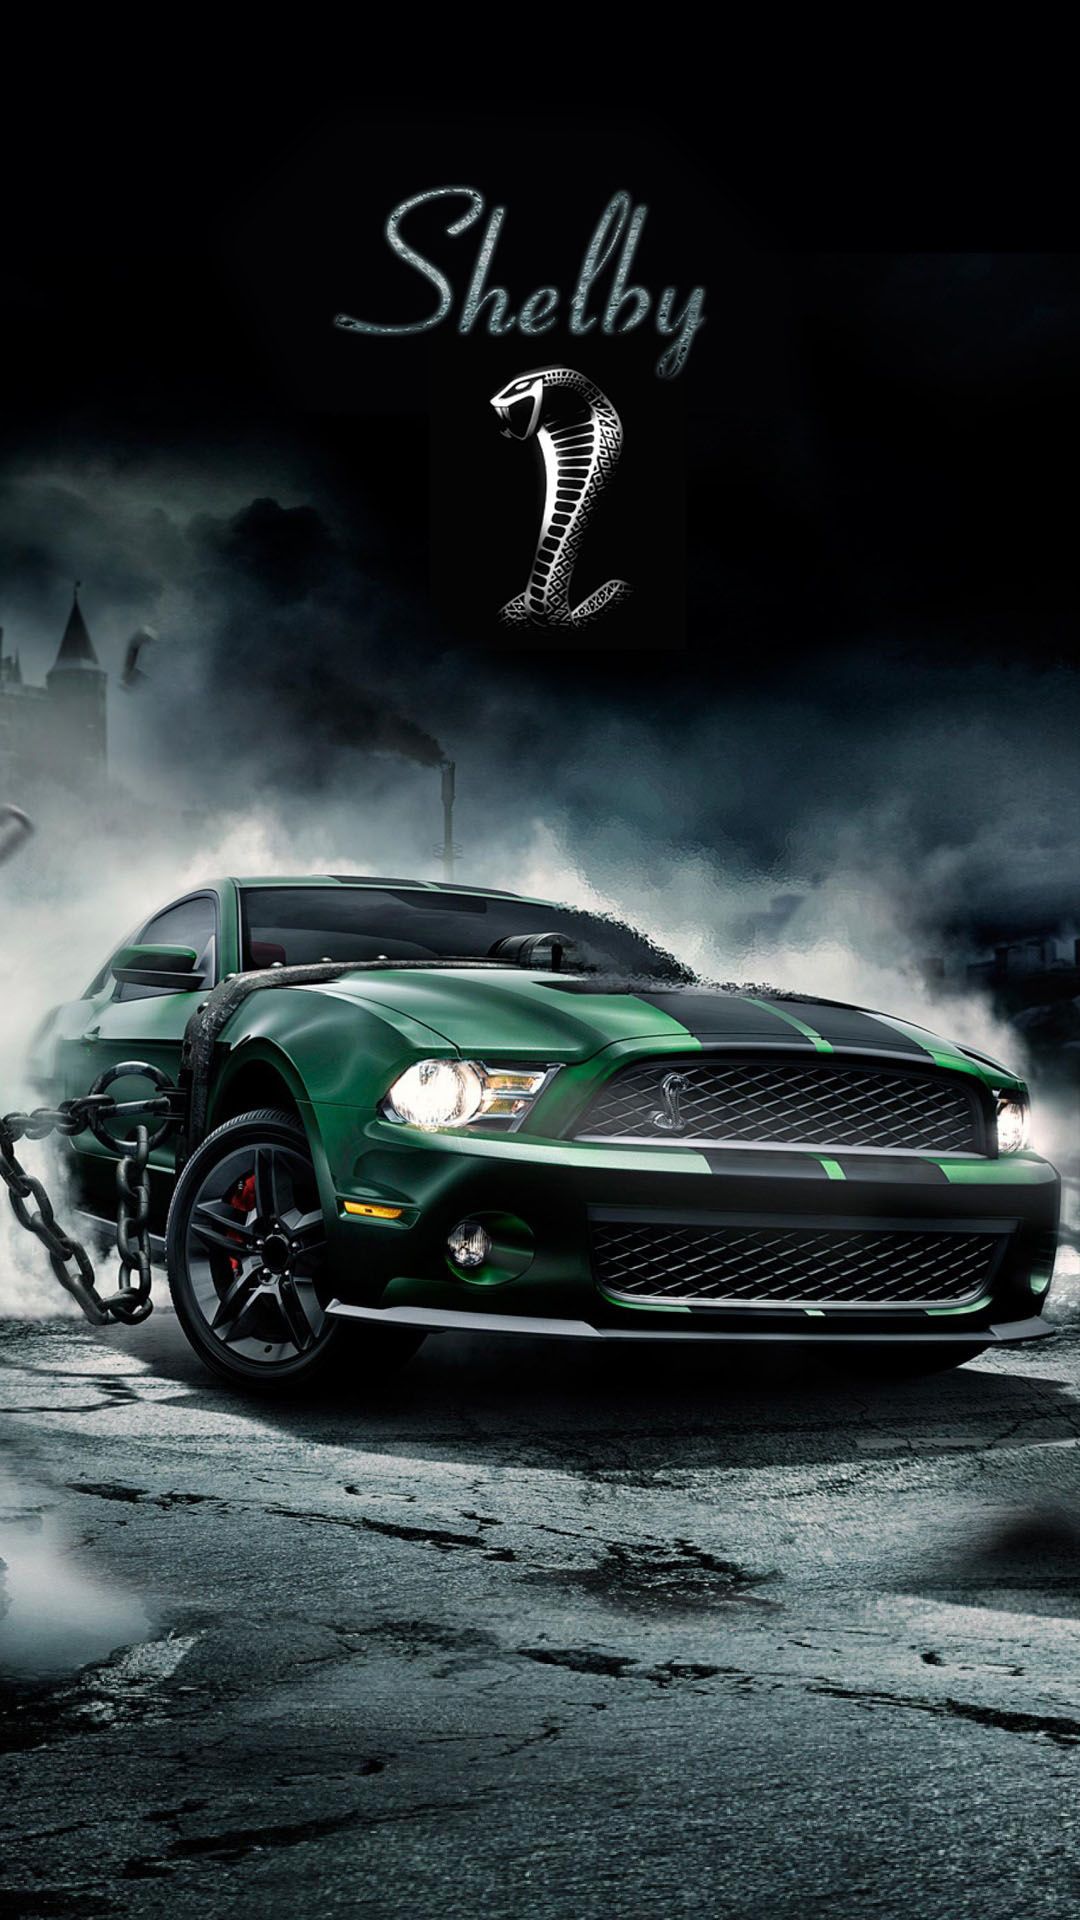 These are 5 Image about Muscle Car Wallpaper For AndroidDownload